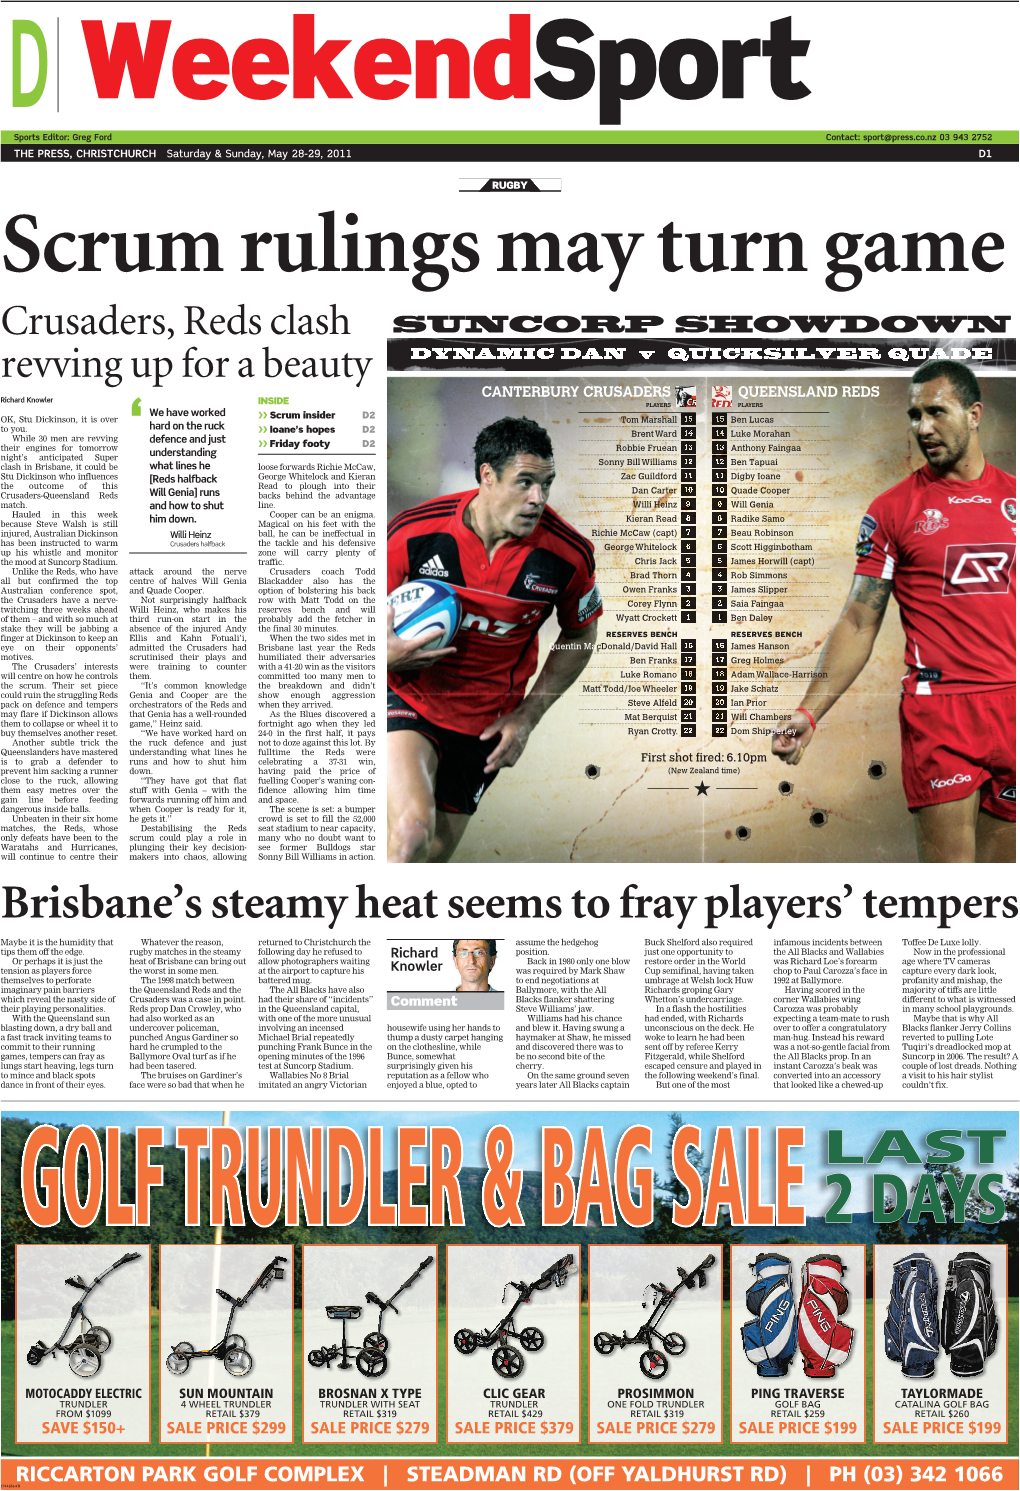 Brisbane's Steamy Heat Seems to Fray Players' Tempers